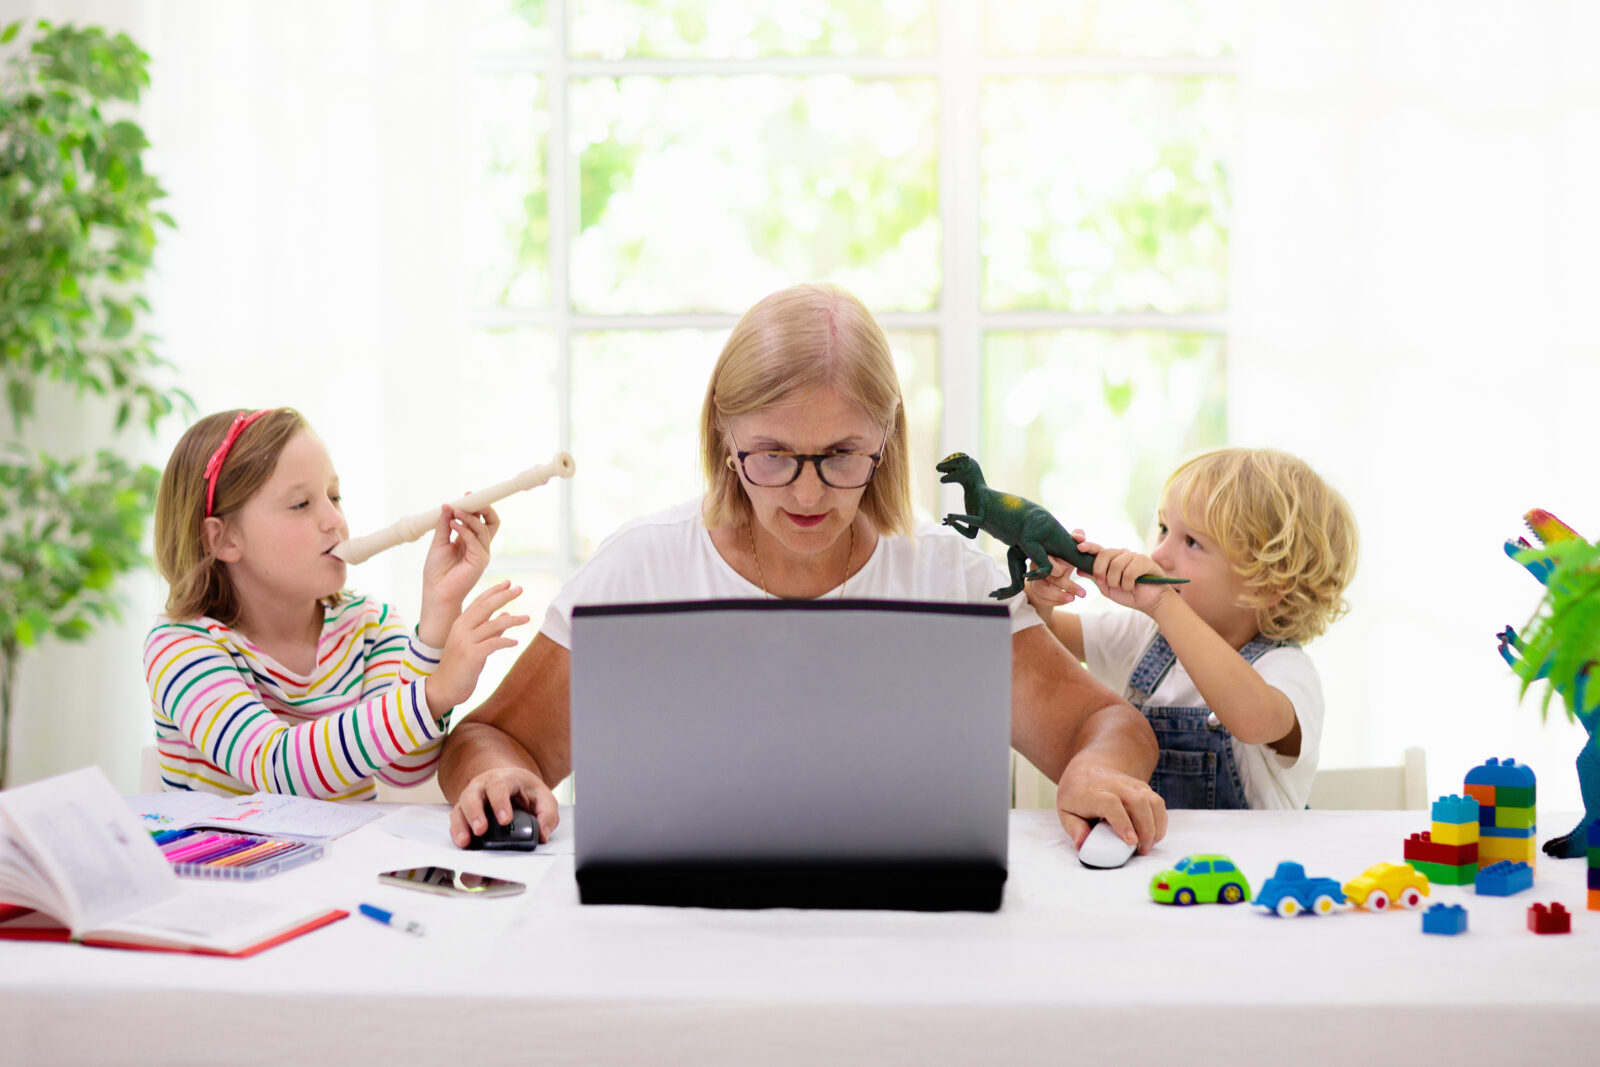 Mother works on computer while children do unorganized activities. 